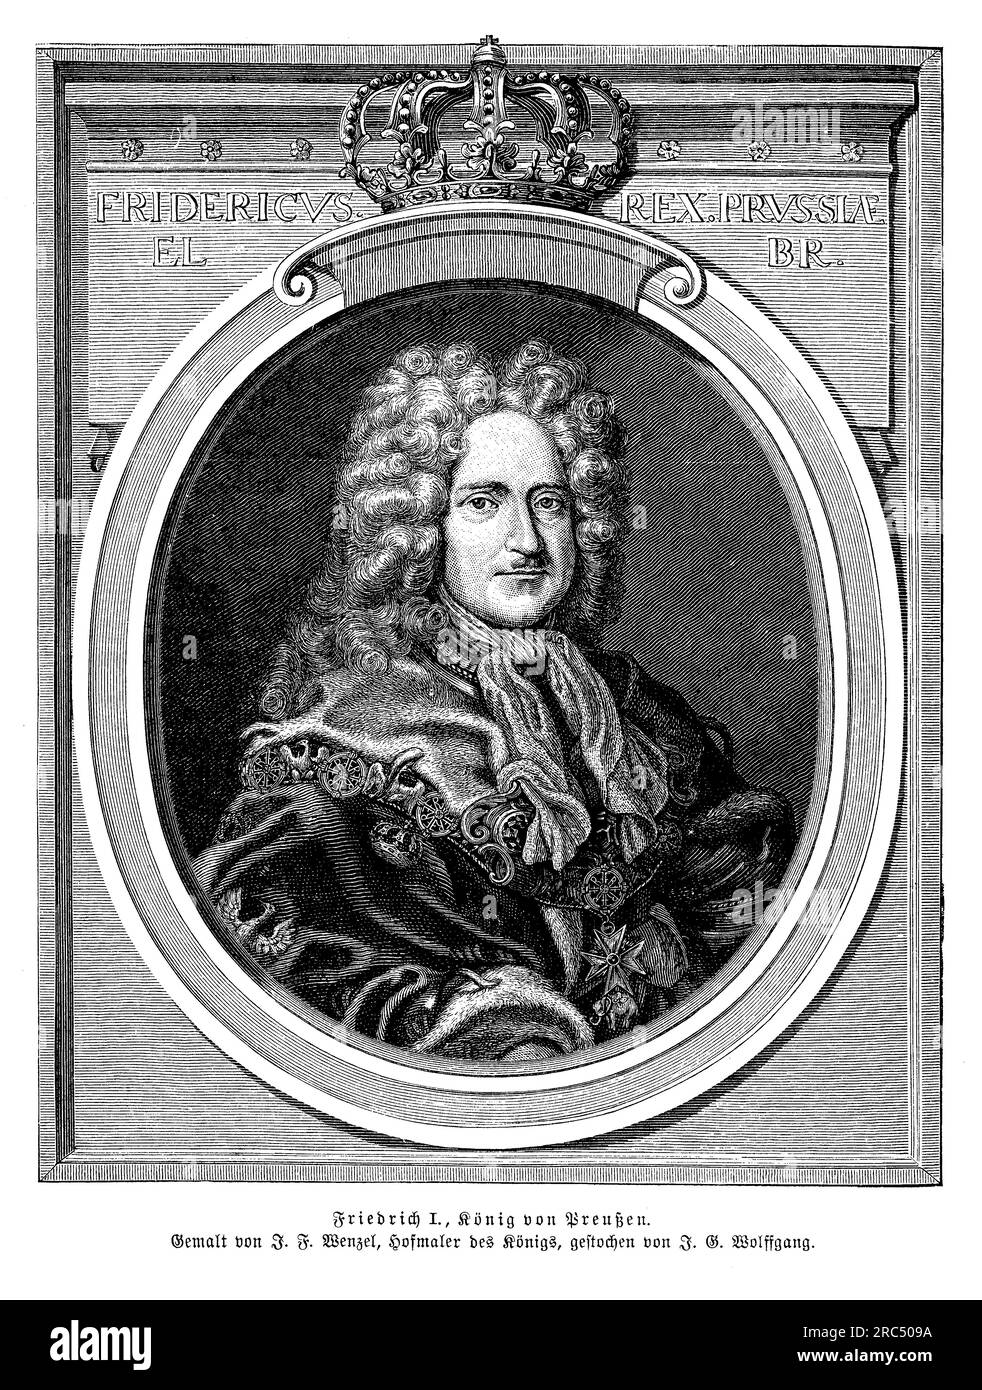 Portrait of Friedrich I, also known as Friedrich I of Prussia,  first King of Prussia from 1701 until his death in 1713. He was born on July 11, 1657, and ruled during a crucial period in Prussian history, overseeing the transformation of the state into a major power. Friedrich I was a member of the Hohenzollern dynasty and played a significant role in elevating Prussia to the status of a kingdom. He pursued territorial expansion and focused on strengthening the military and administrative structures of his realm. Friedrich I is often remembered as a lavish and extravagant monarch, known for h Stock Photo